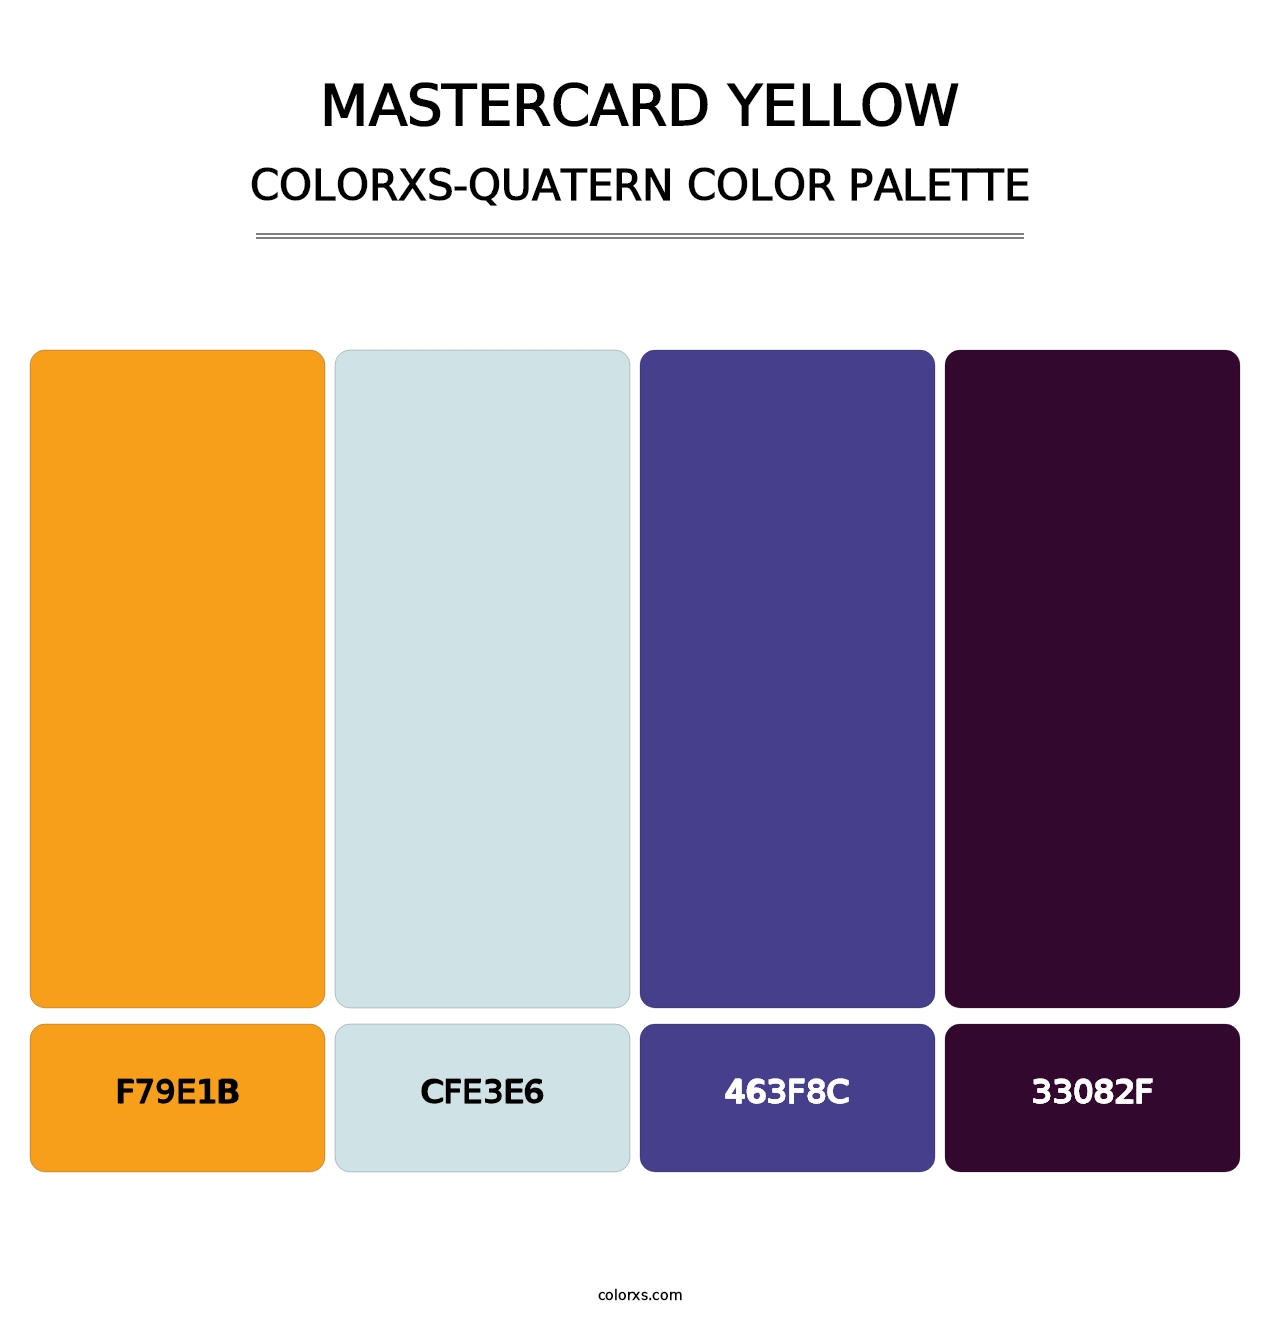 Mastercard Yellow - Colorxs Quatern Palette